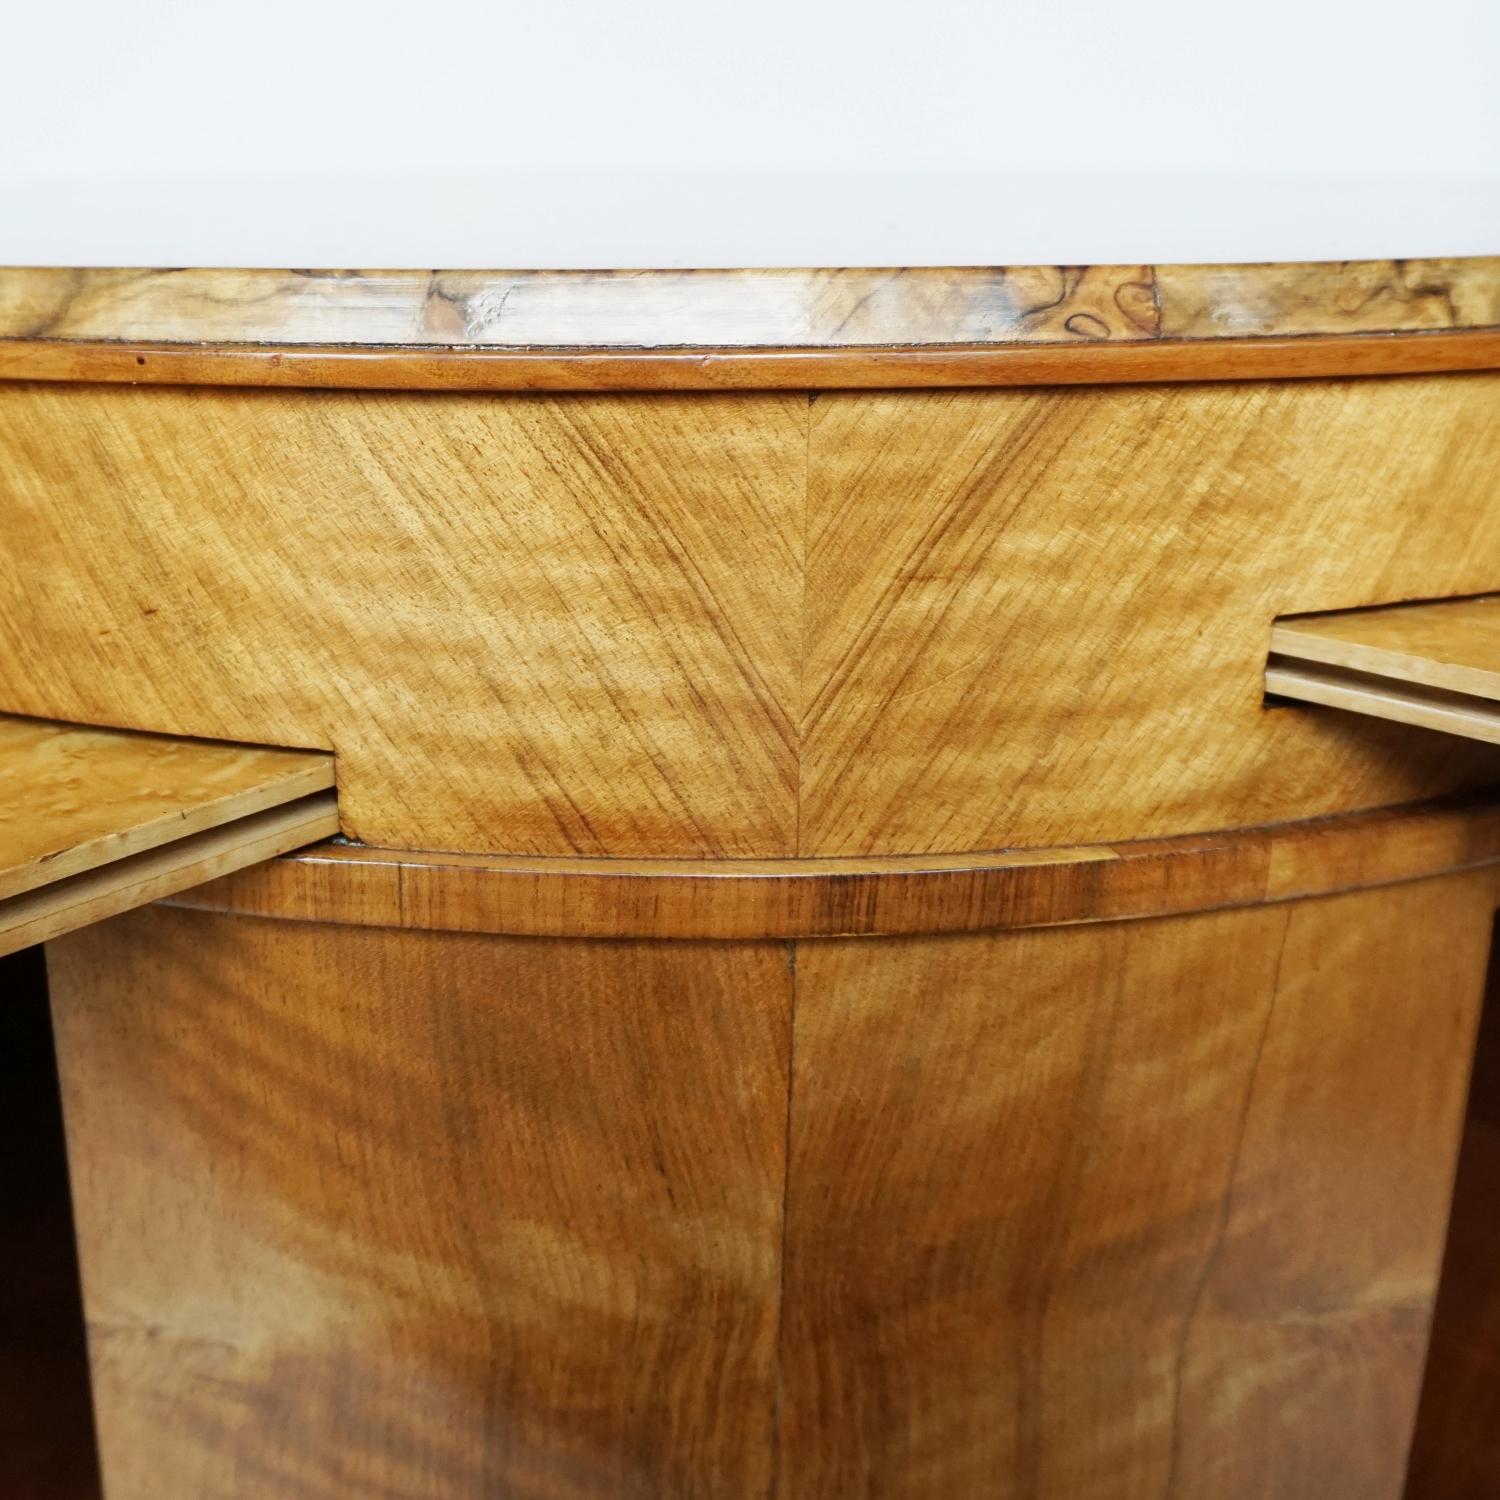 Walnut Art Deco Library Table by Heal's of London Circa 1935 English